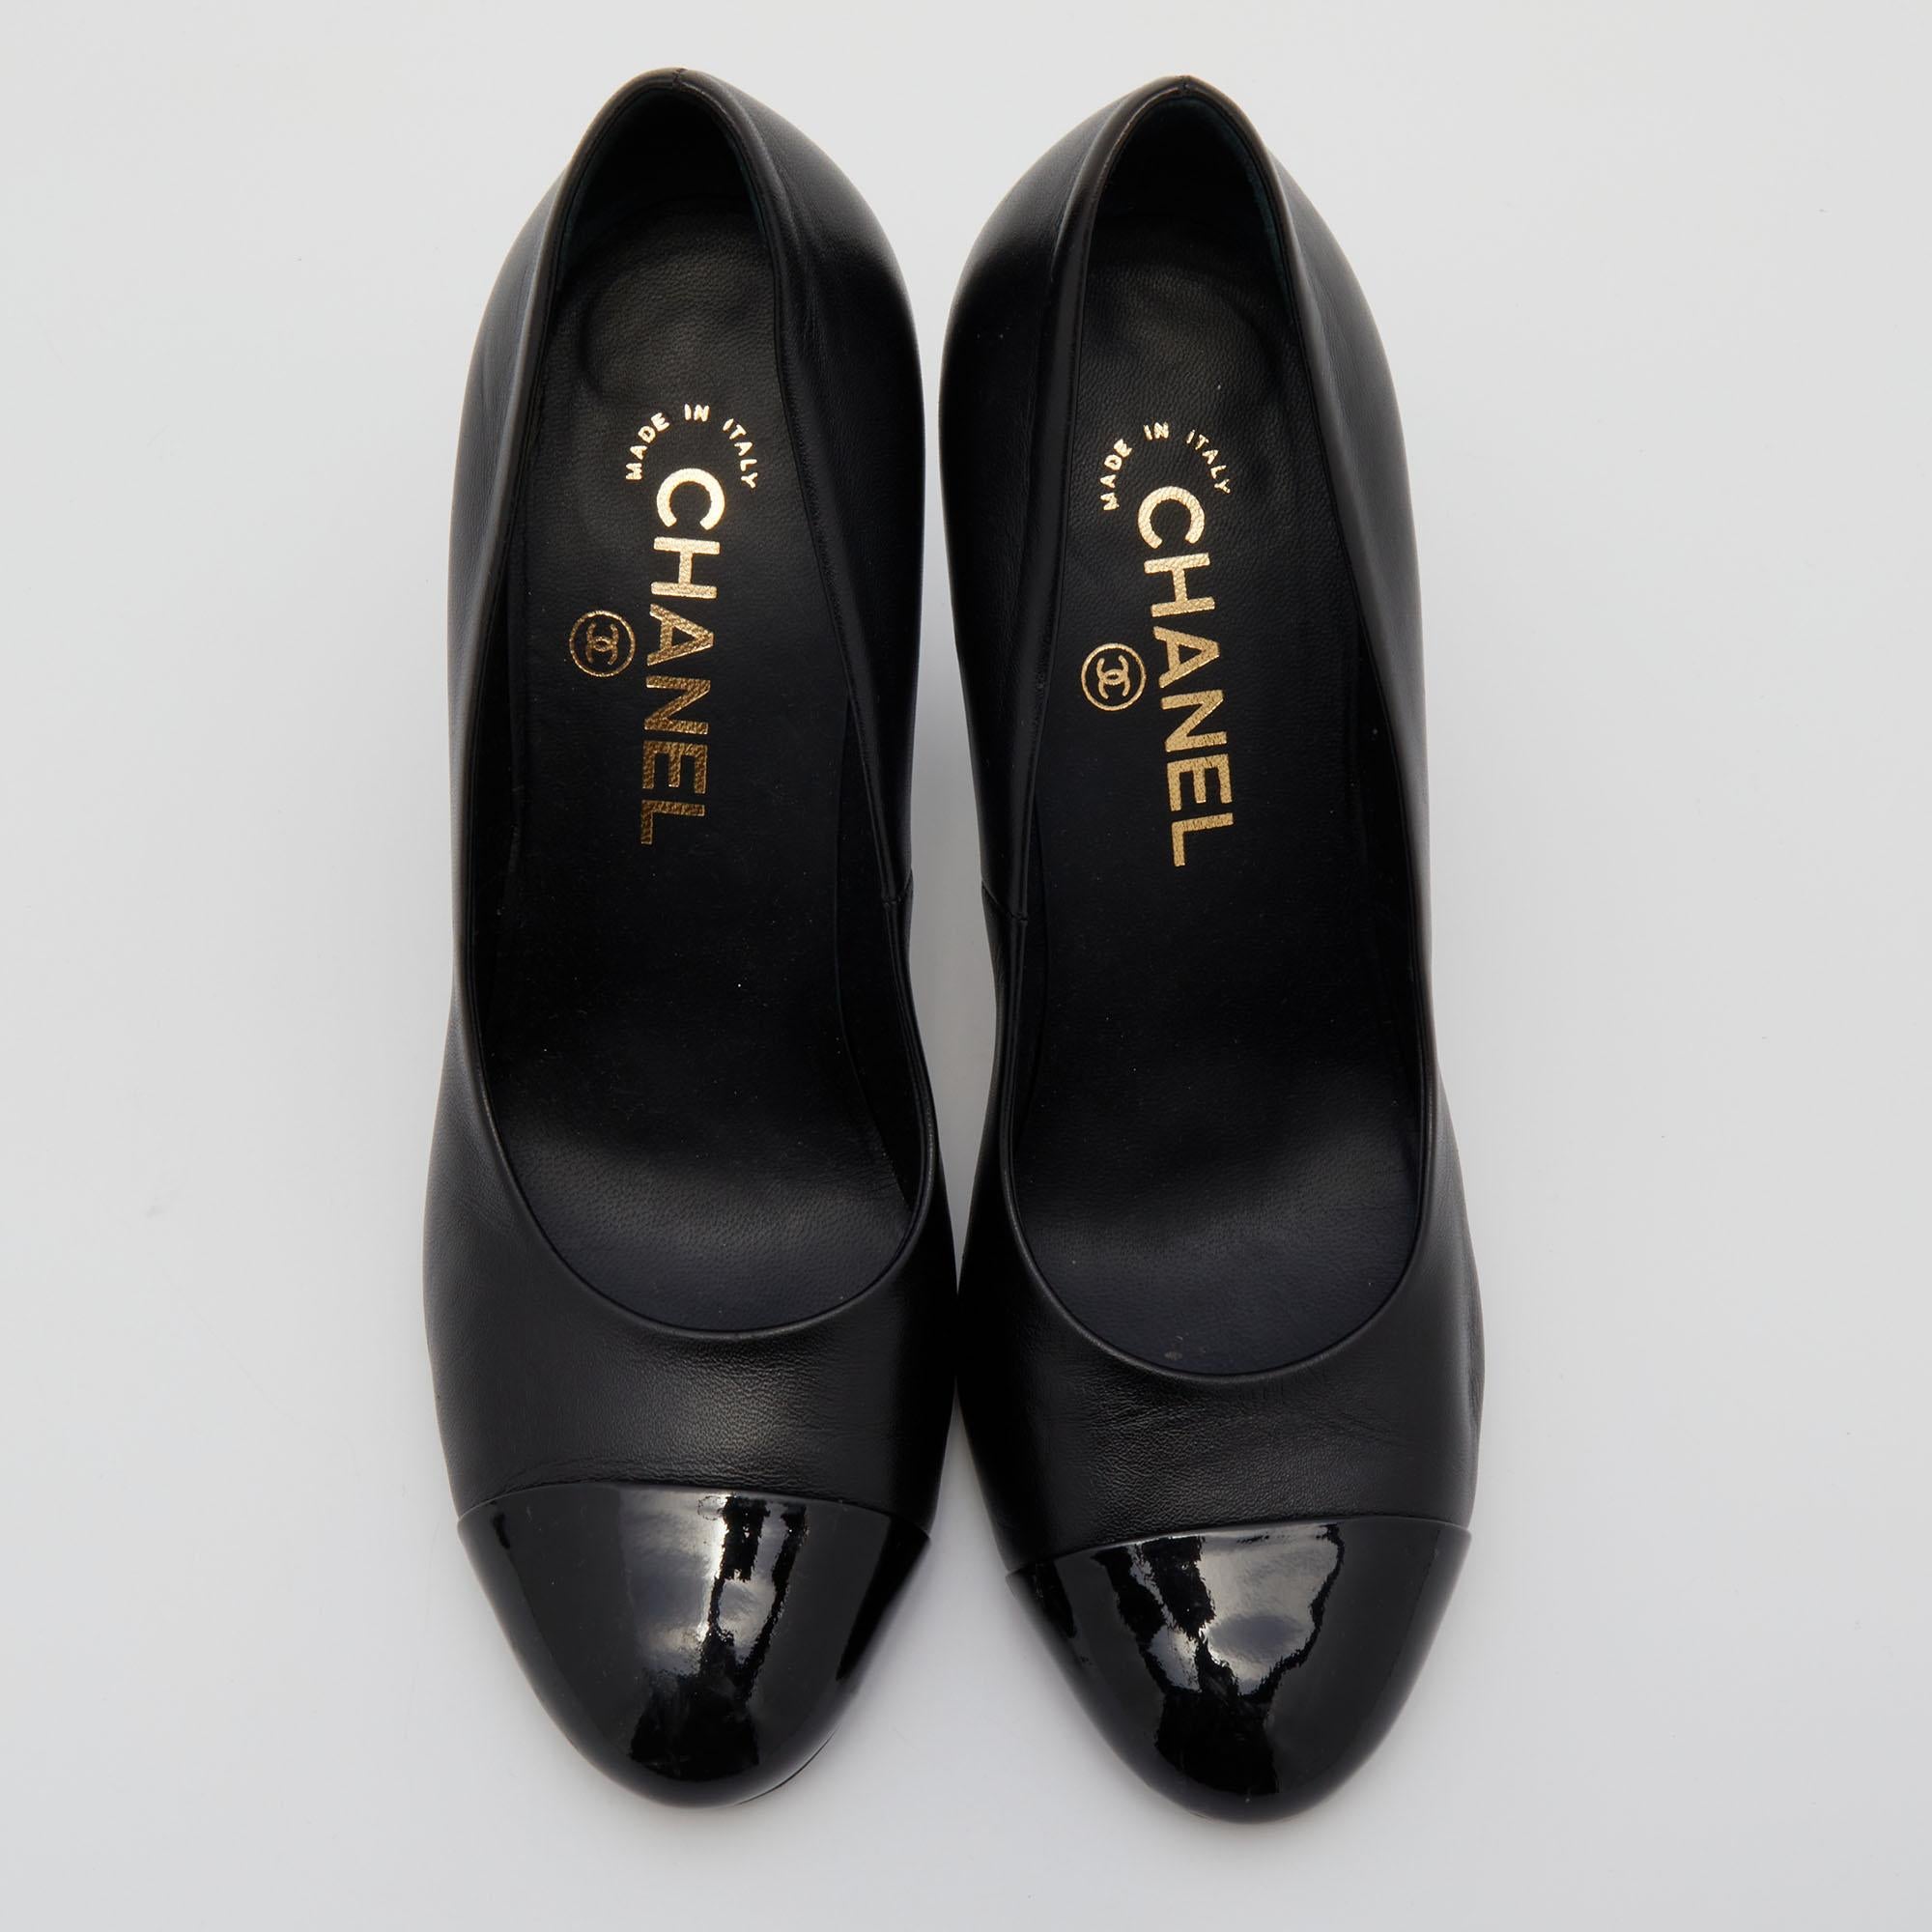 In a magical blend of luxury and elegance, these Chanel pumps come crafted from black patent and leather and are designed with cap toes with the faux pearls on the heels adding the perfect finishing touch to the chic pair.

